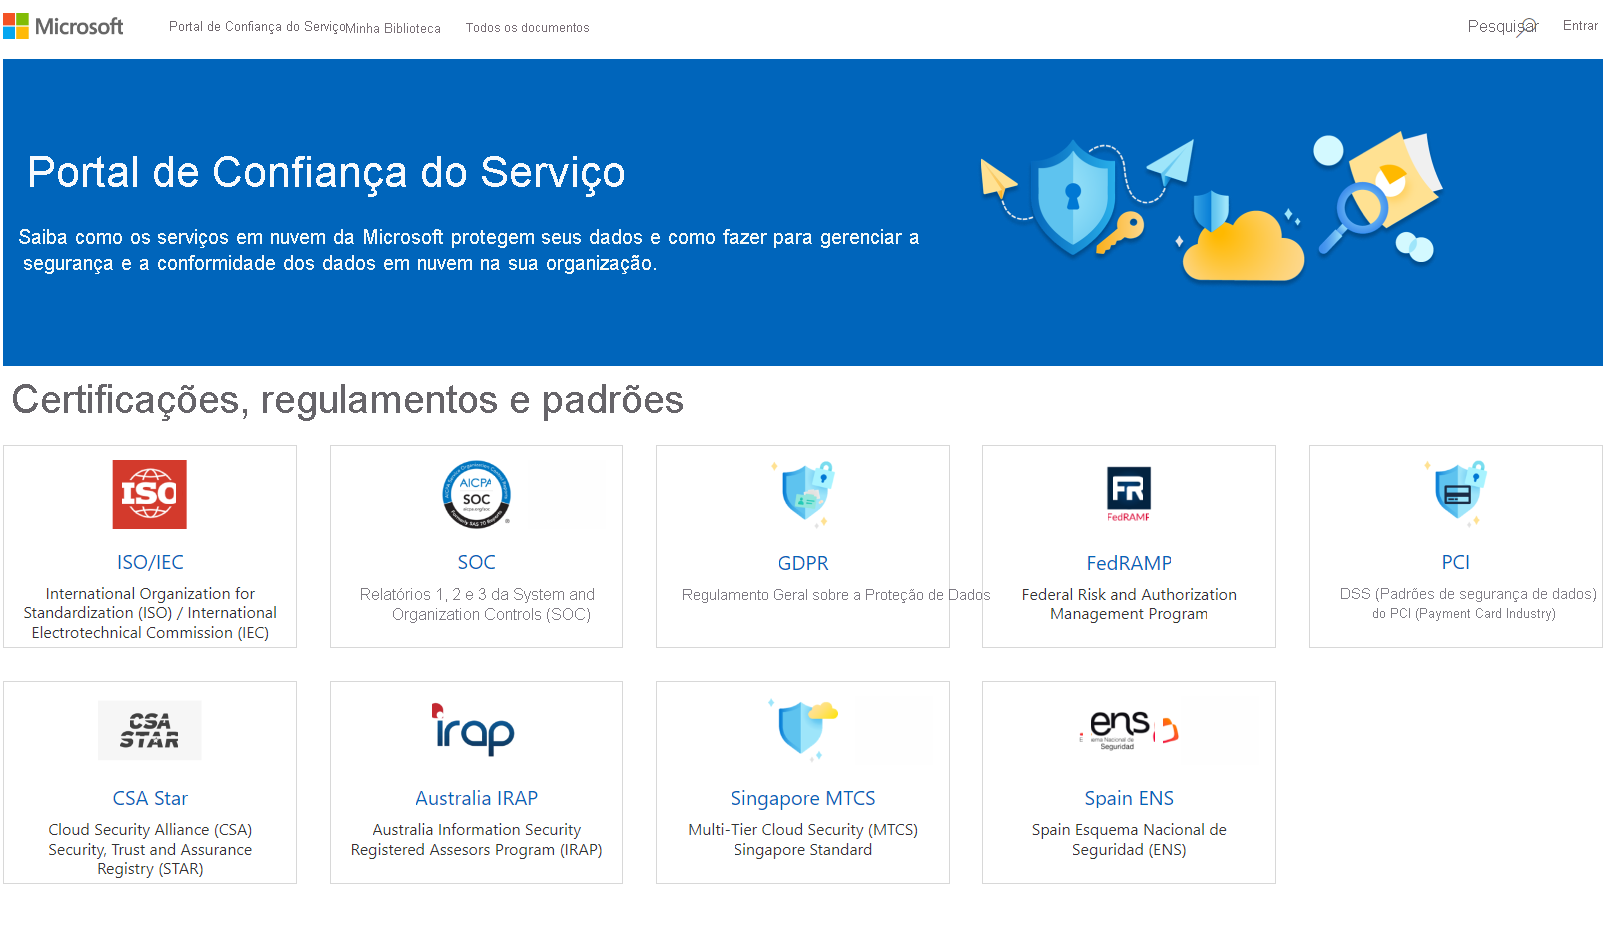 Screenshot of the service trust portal with the main menu items visible.